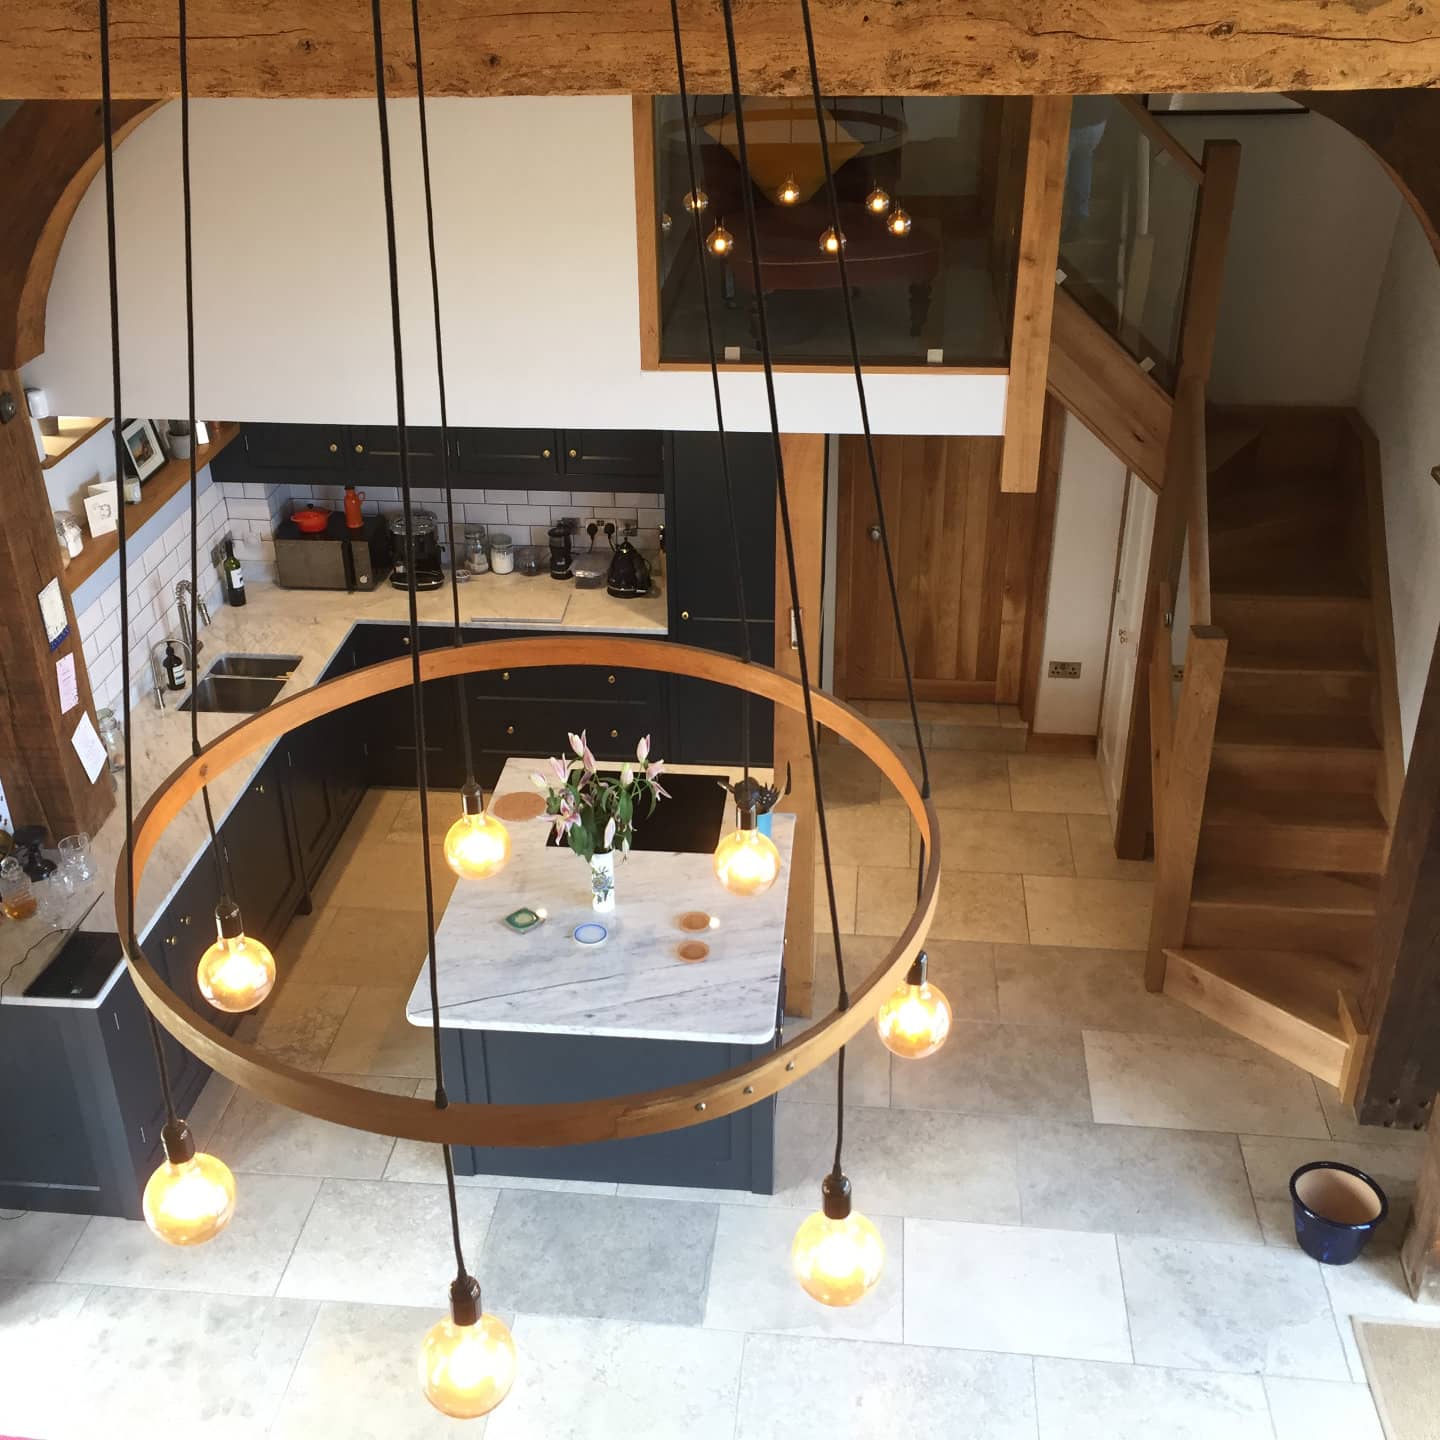 A top view of a bespoke kitchen which has been fitted in a barn.